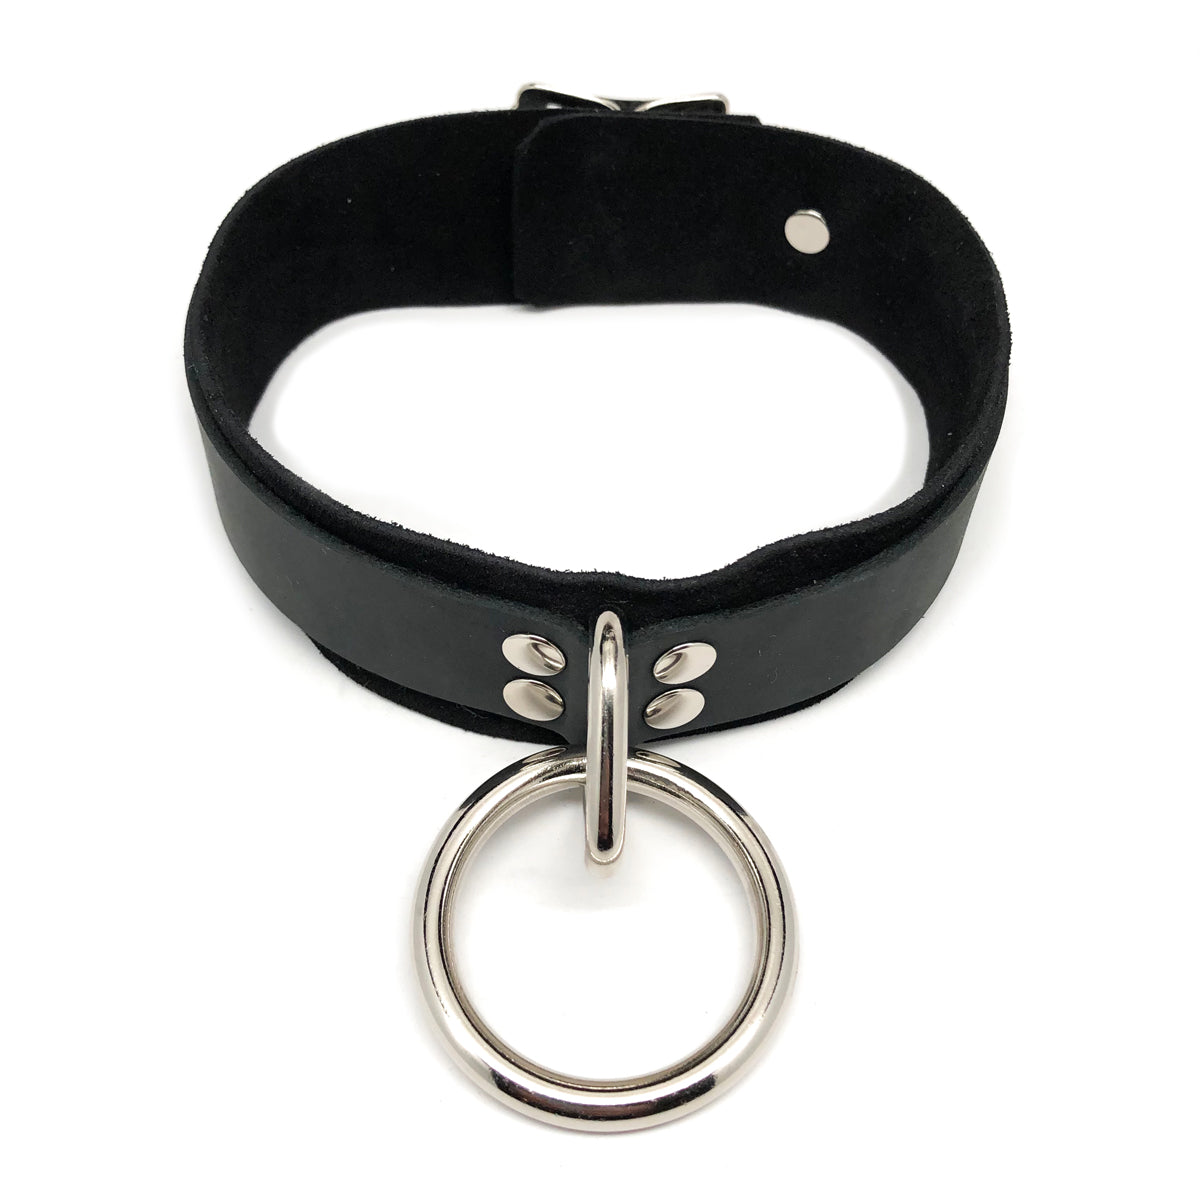 When you want a leather collar that&rsquo;s strong enough for rough play but still soft and luxurious on the inside, then you definitely want this handmade, suede-lined beauty.